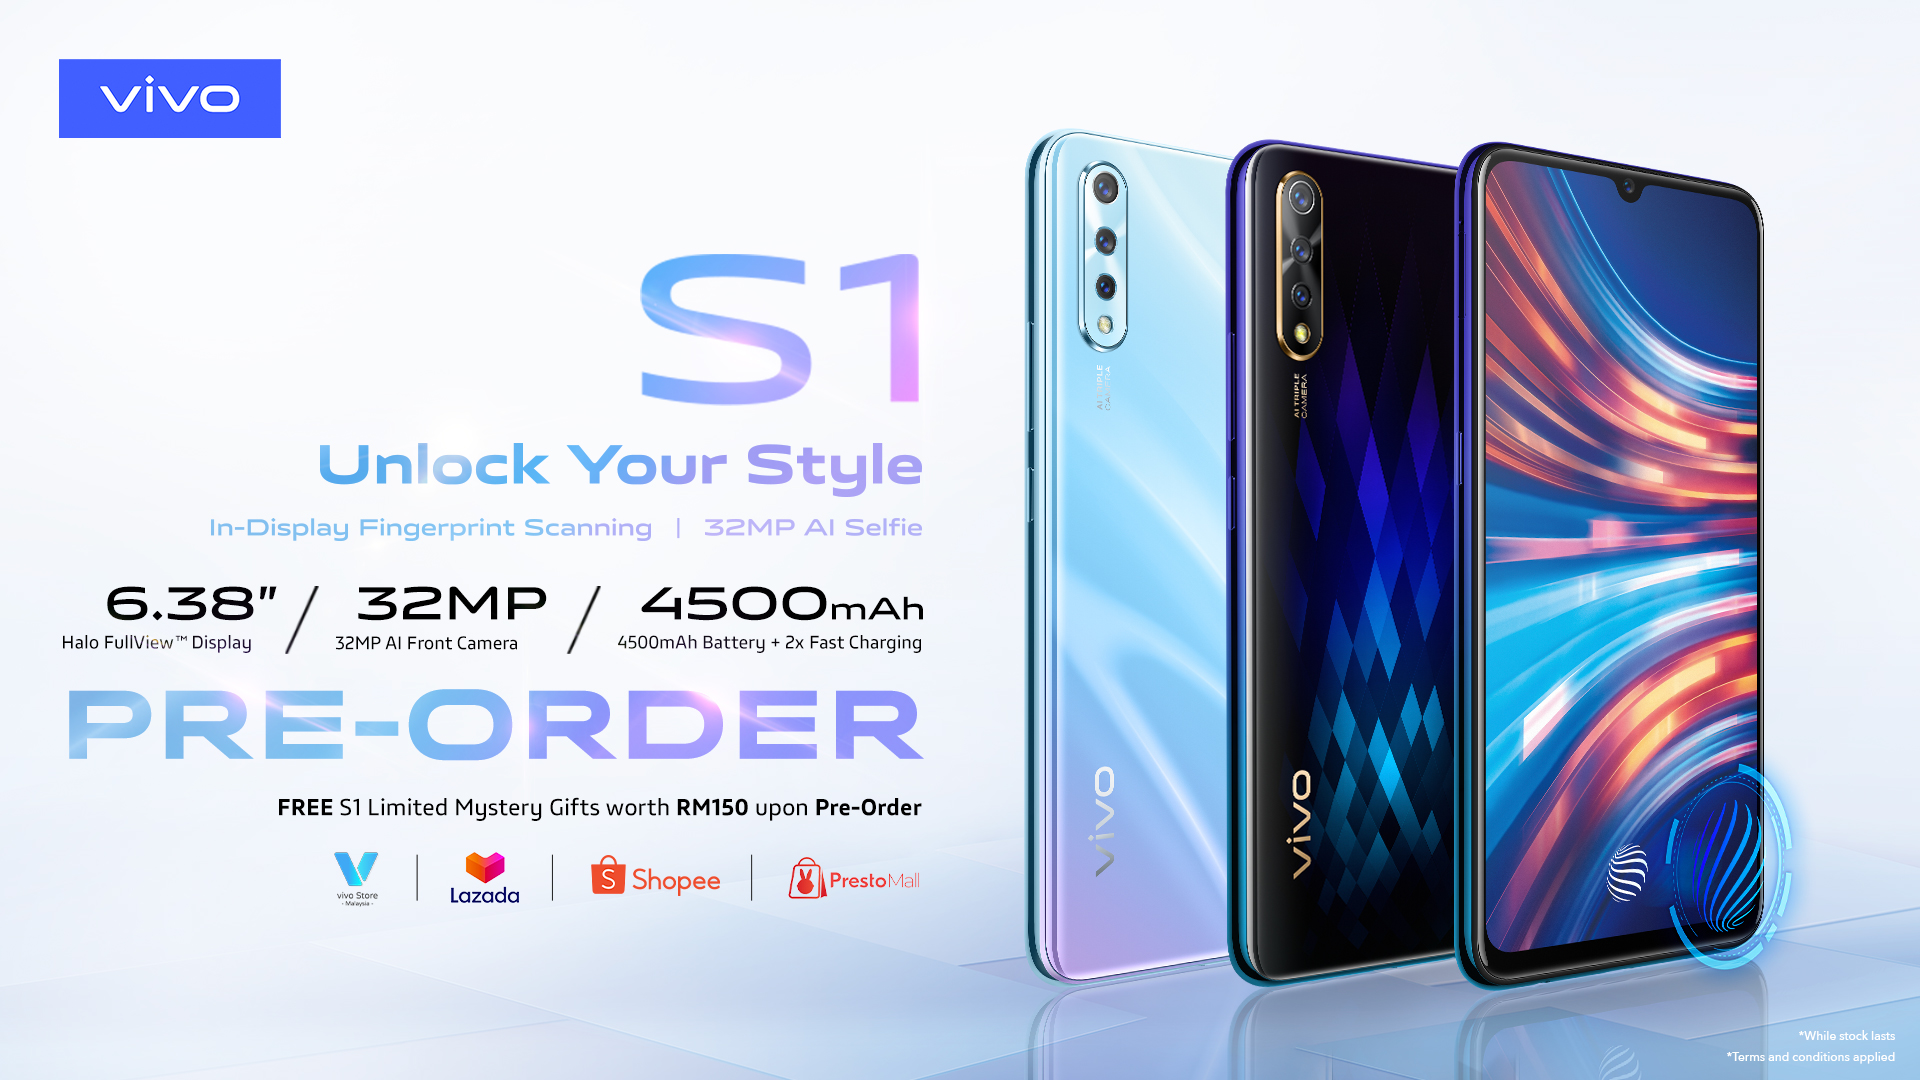 Update Vivo S1 Will Go On Sale In Malaysia On 27 July Pre Order